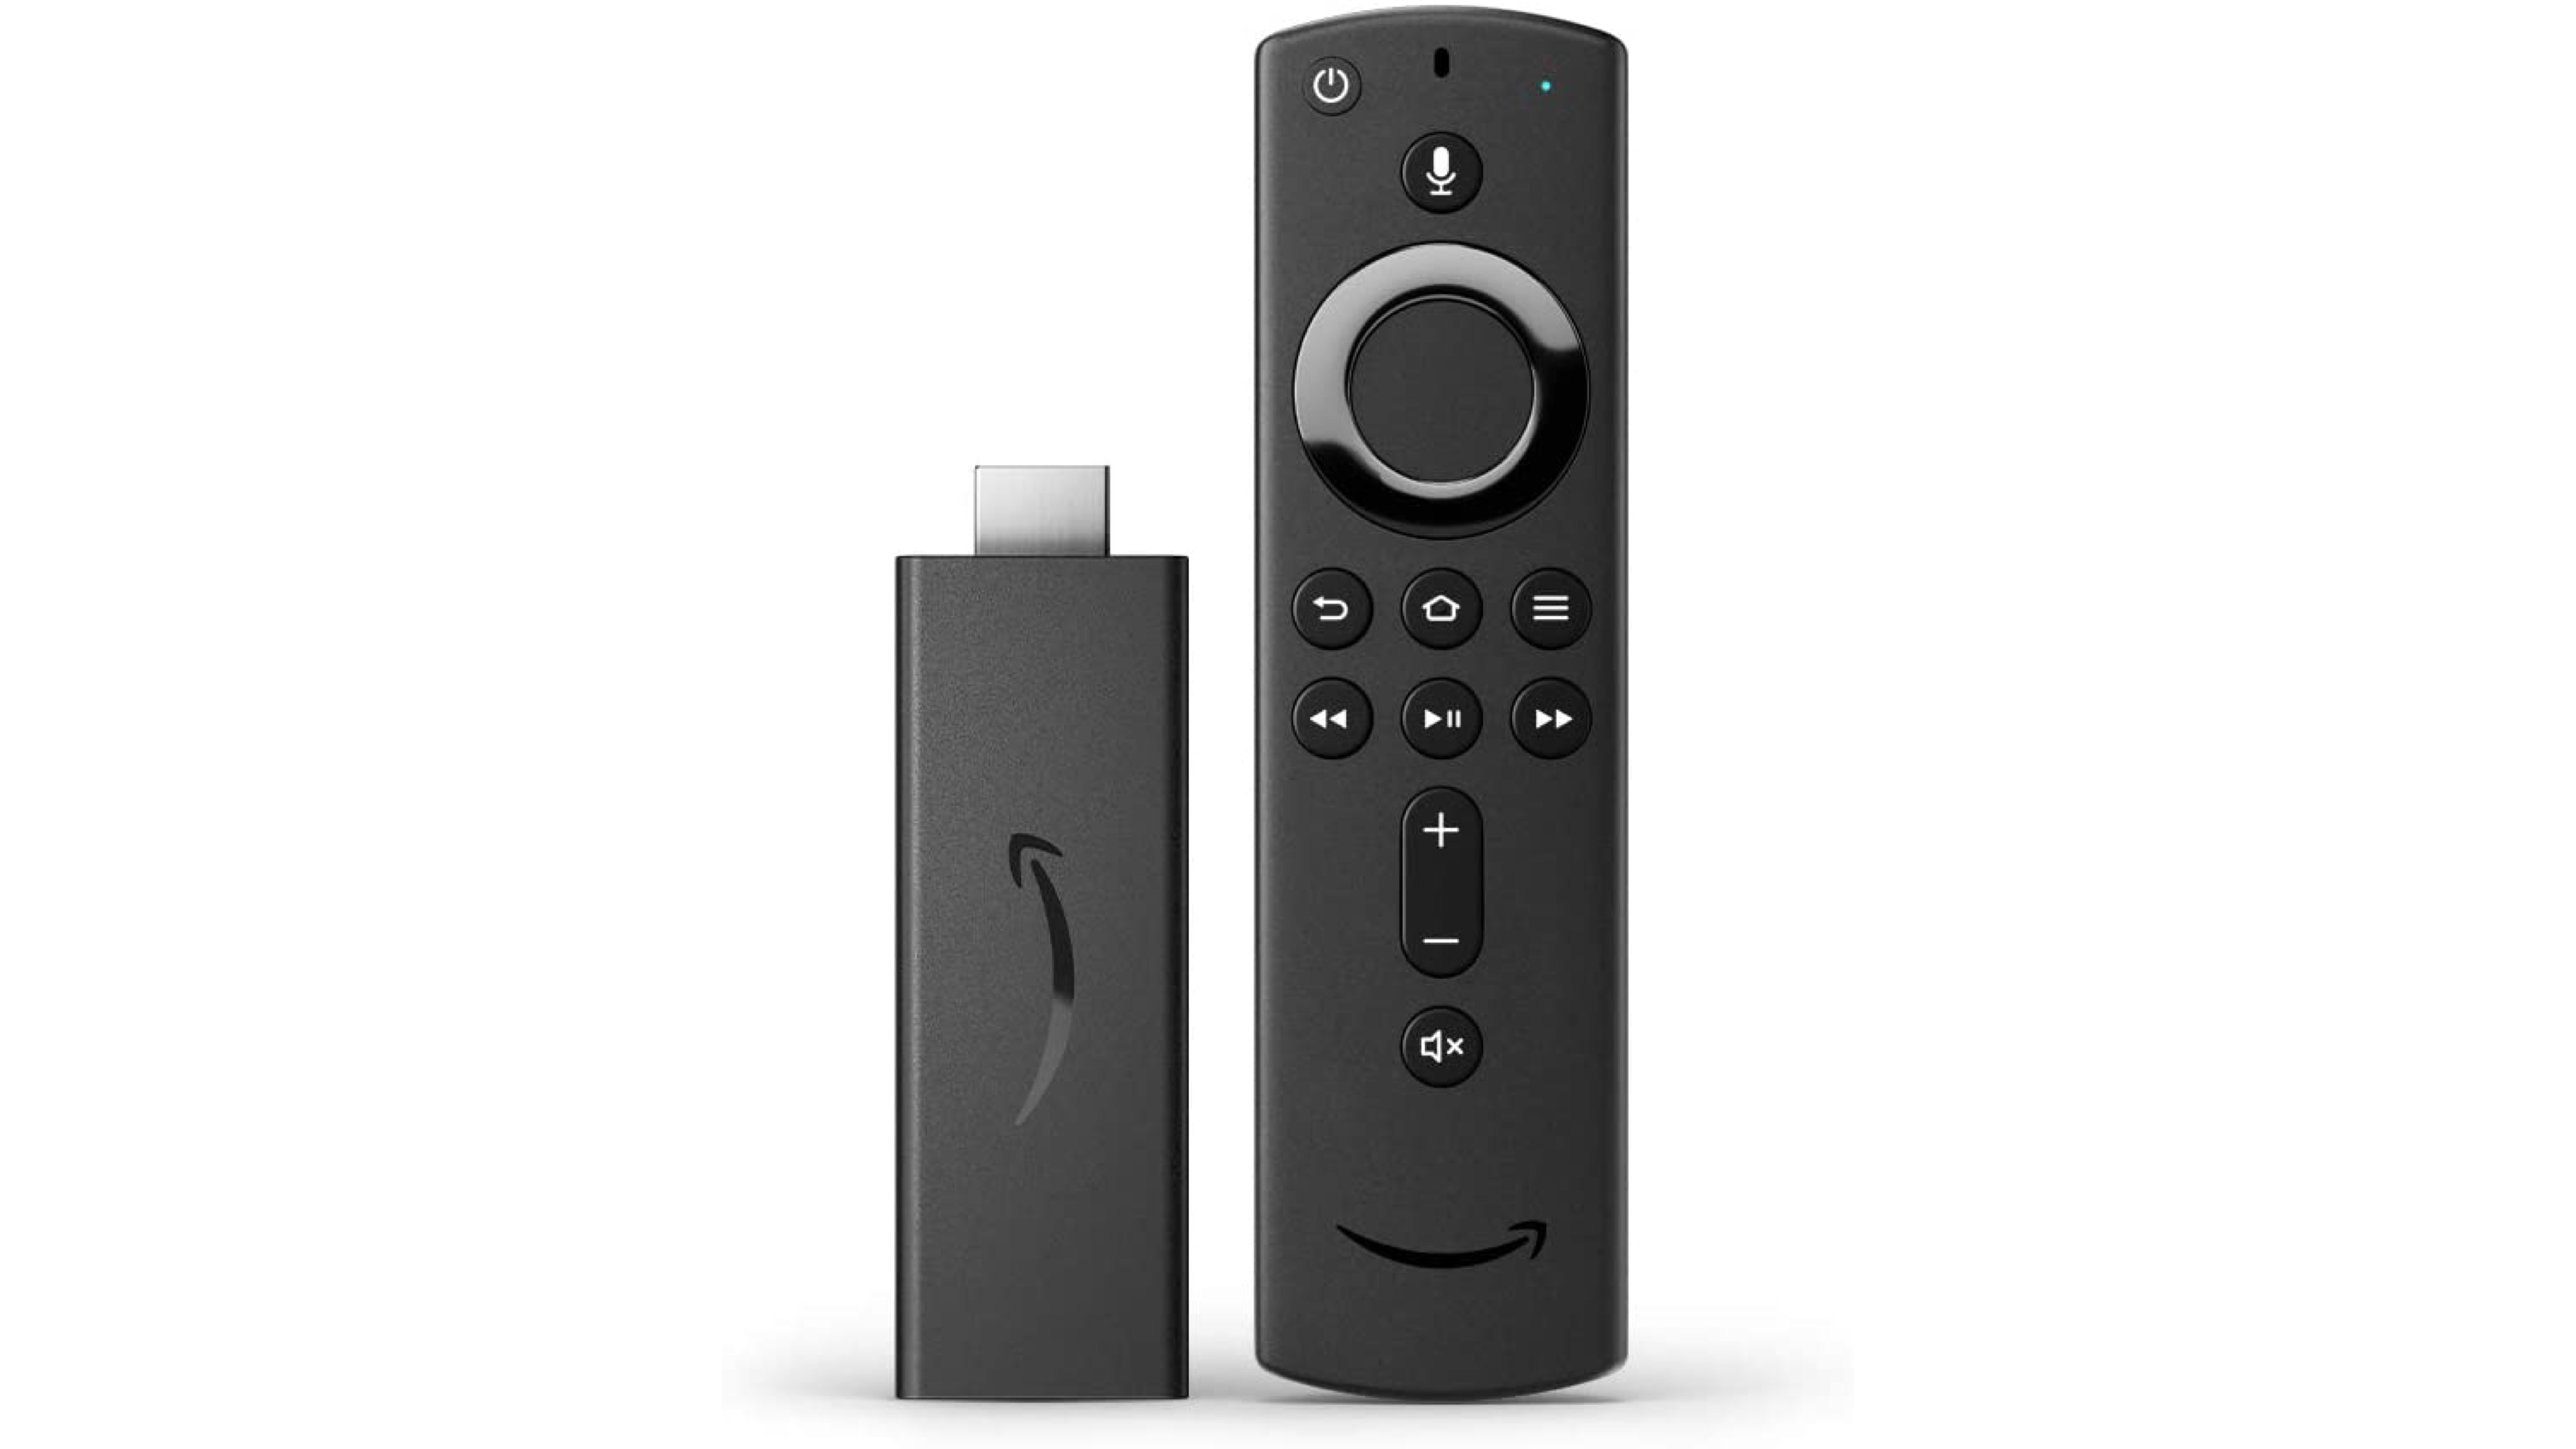 amazon fire tv stick to plug into your tv for access to thousands of shows and apps